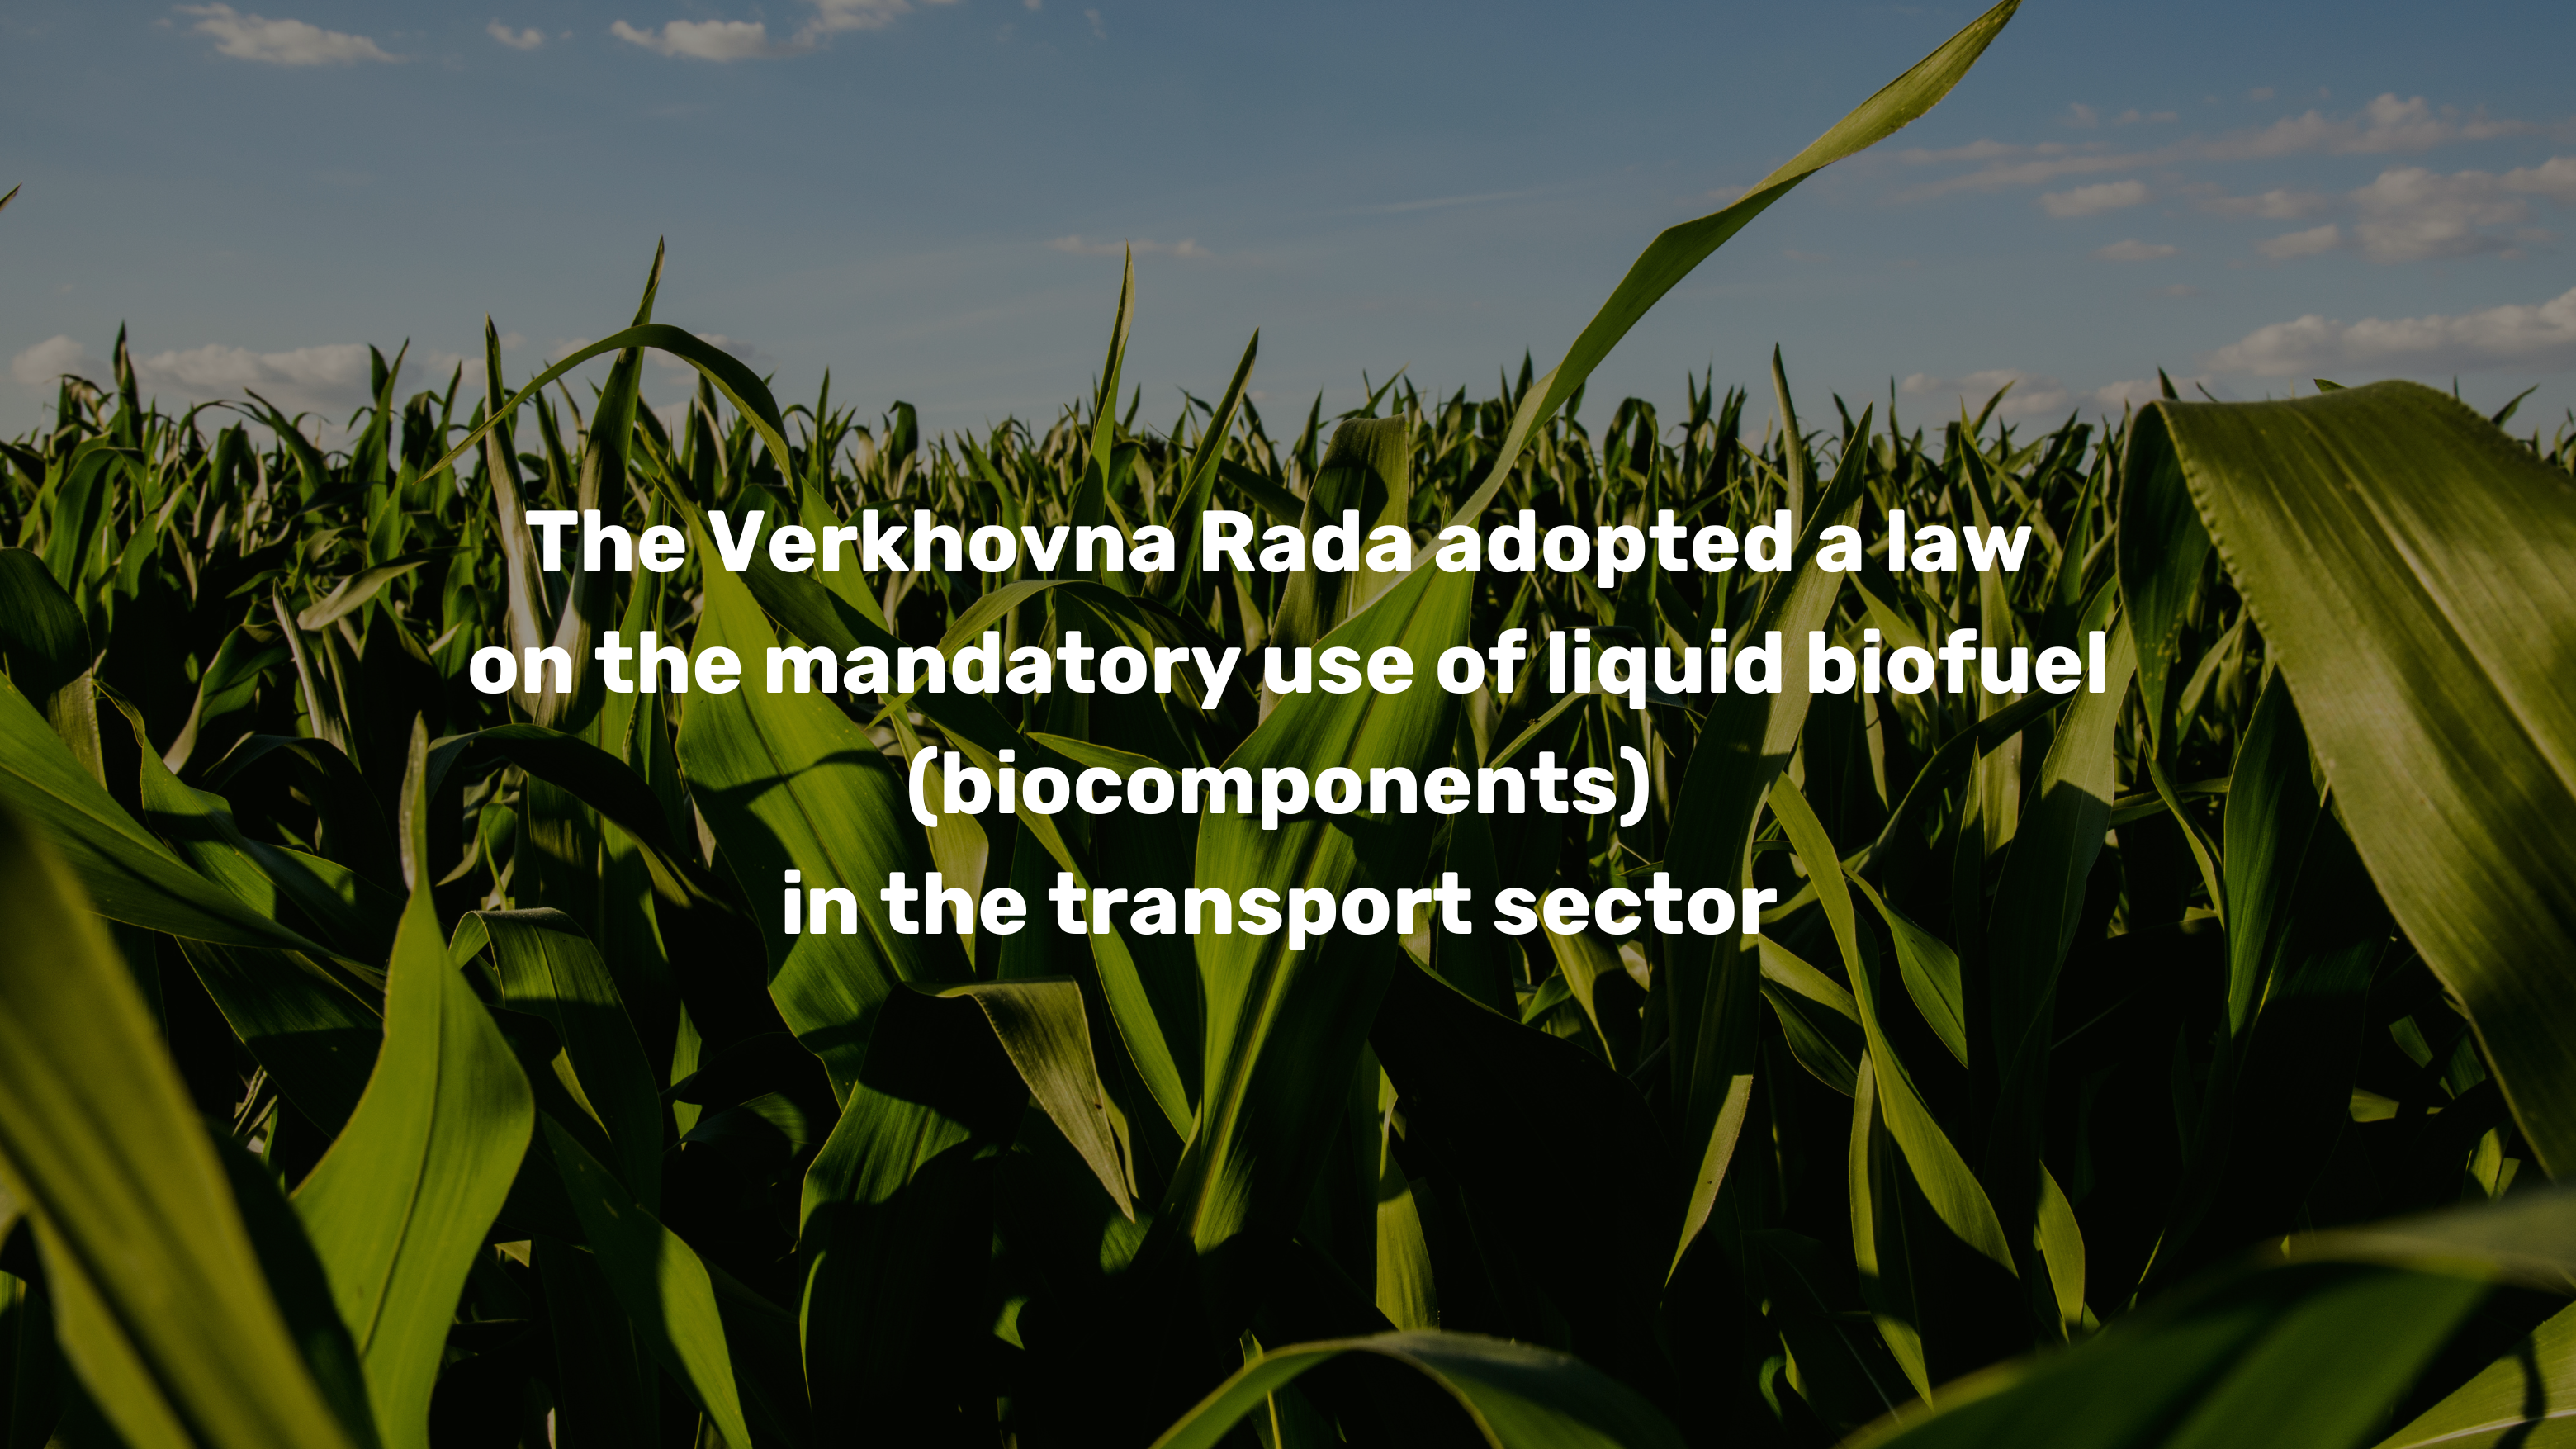 The Parliament of Ukraine has adopted a landmark law mandating the use of liquid biofuels in the transport sector